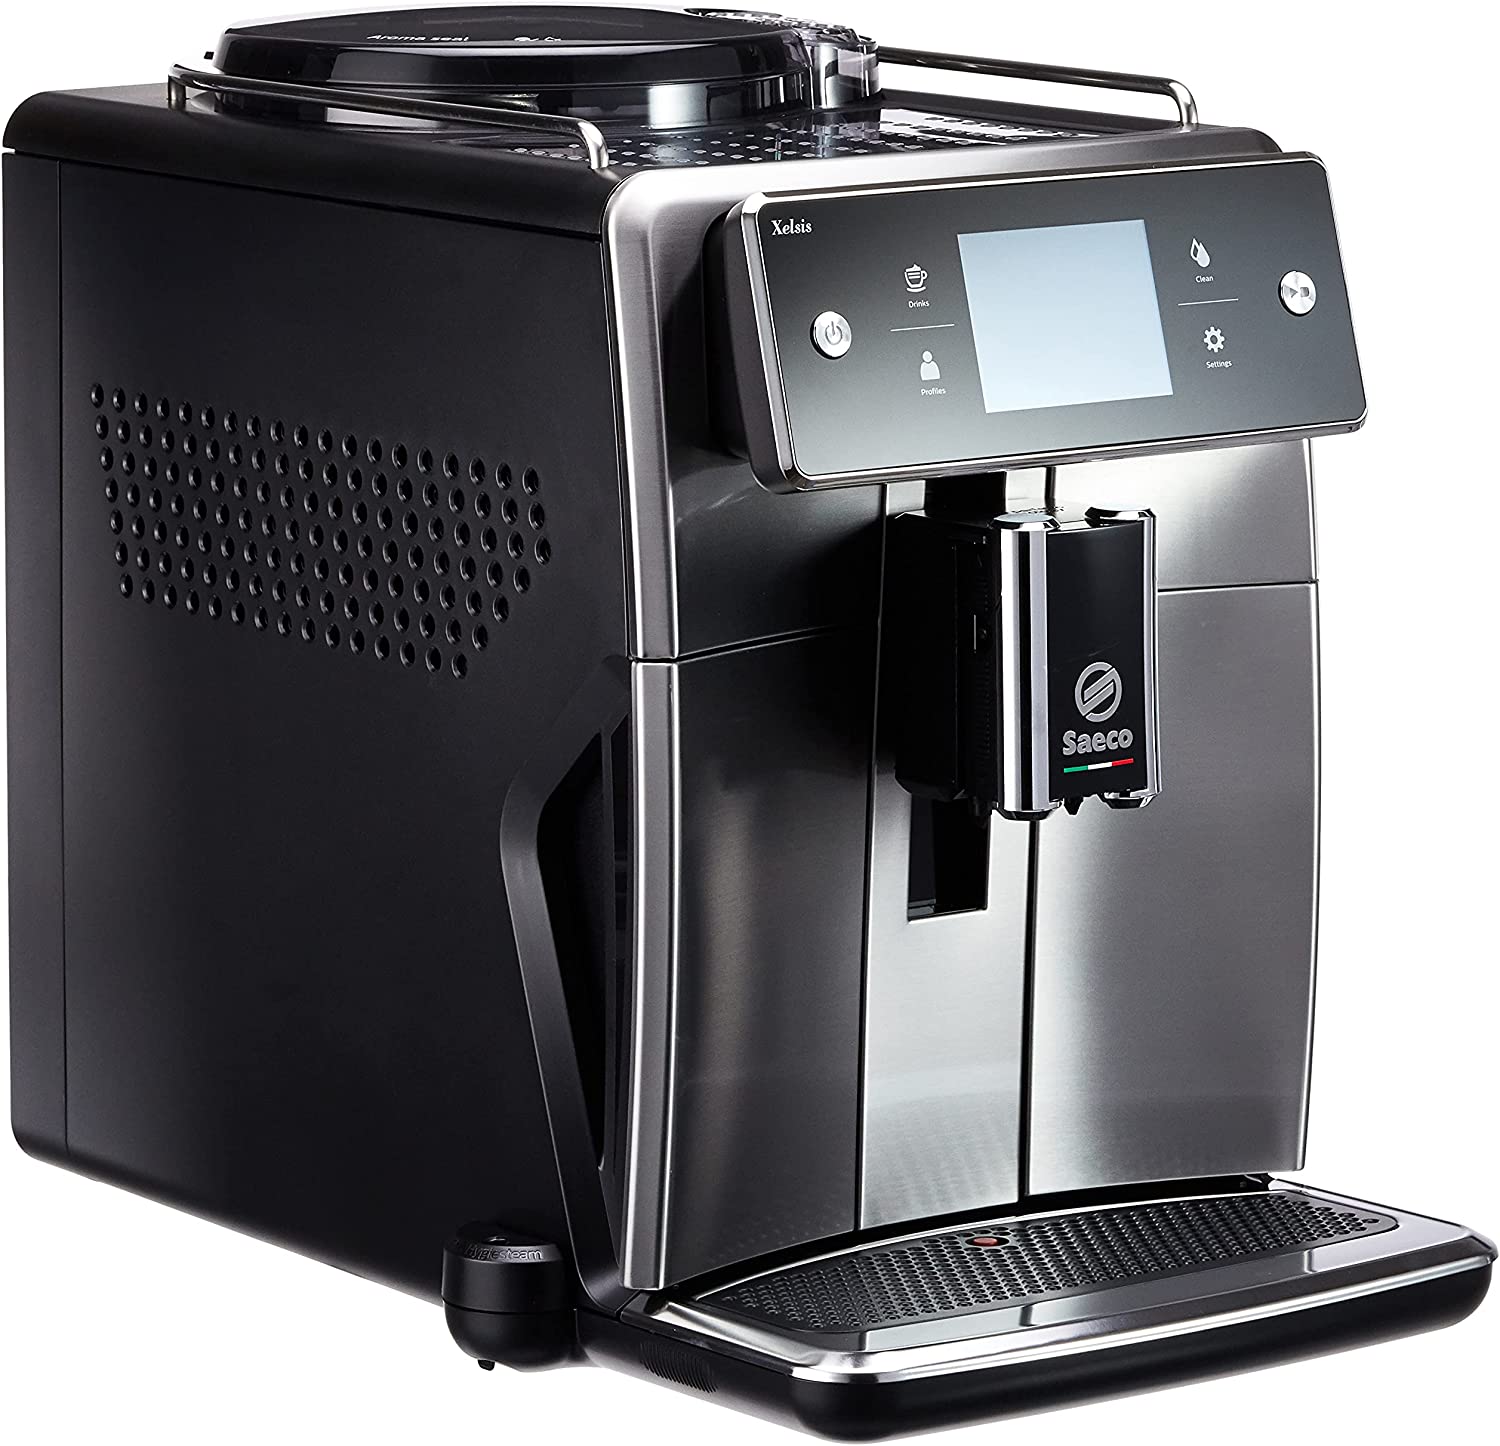 Saeco Xelsis fully automatic coffee machine, Touchscreen